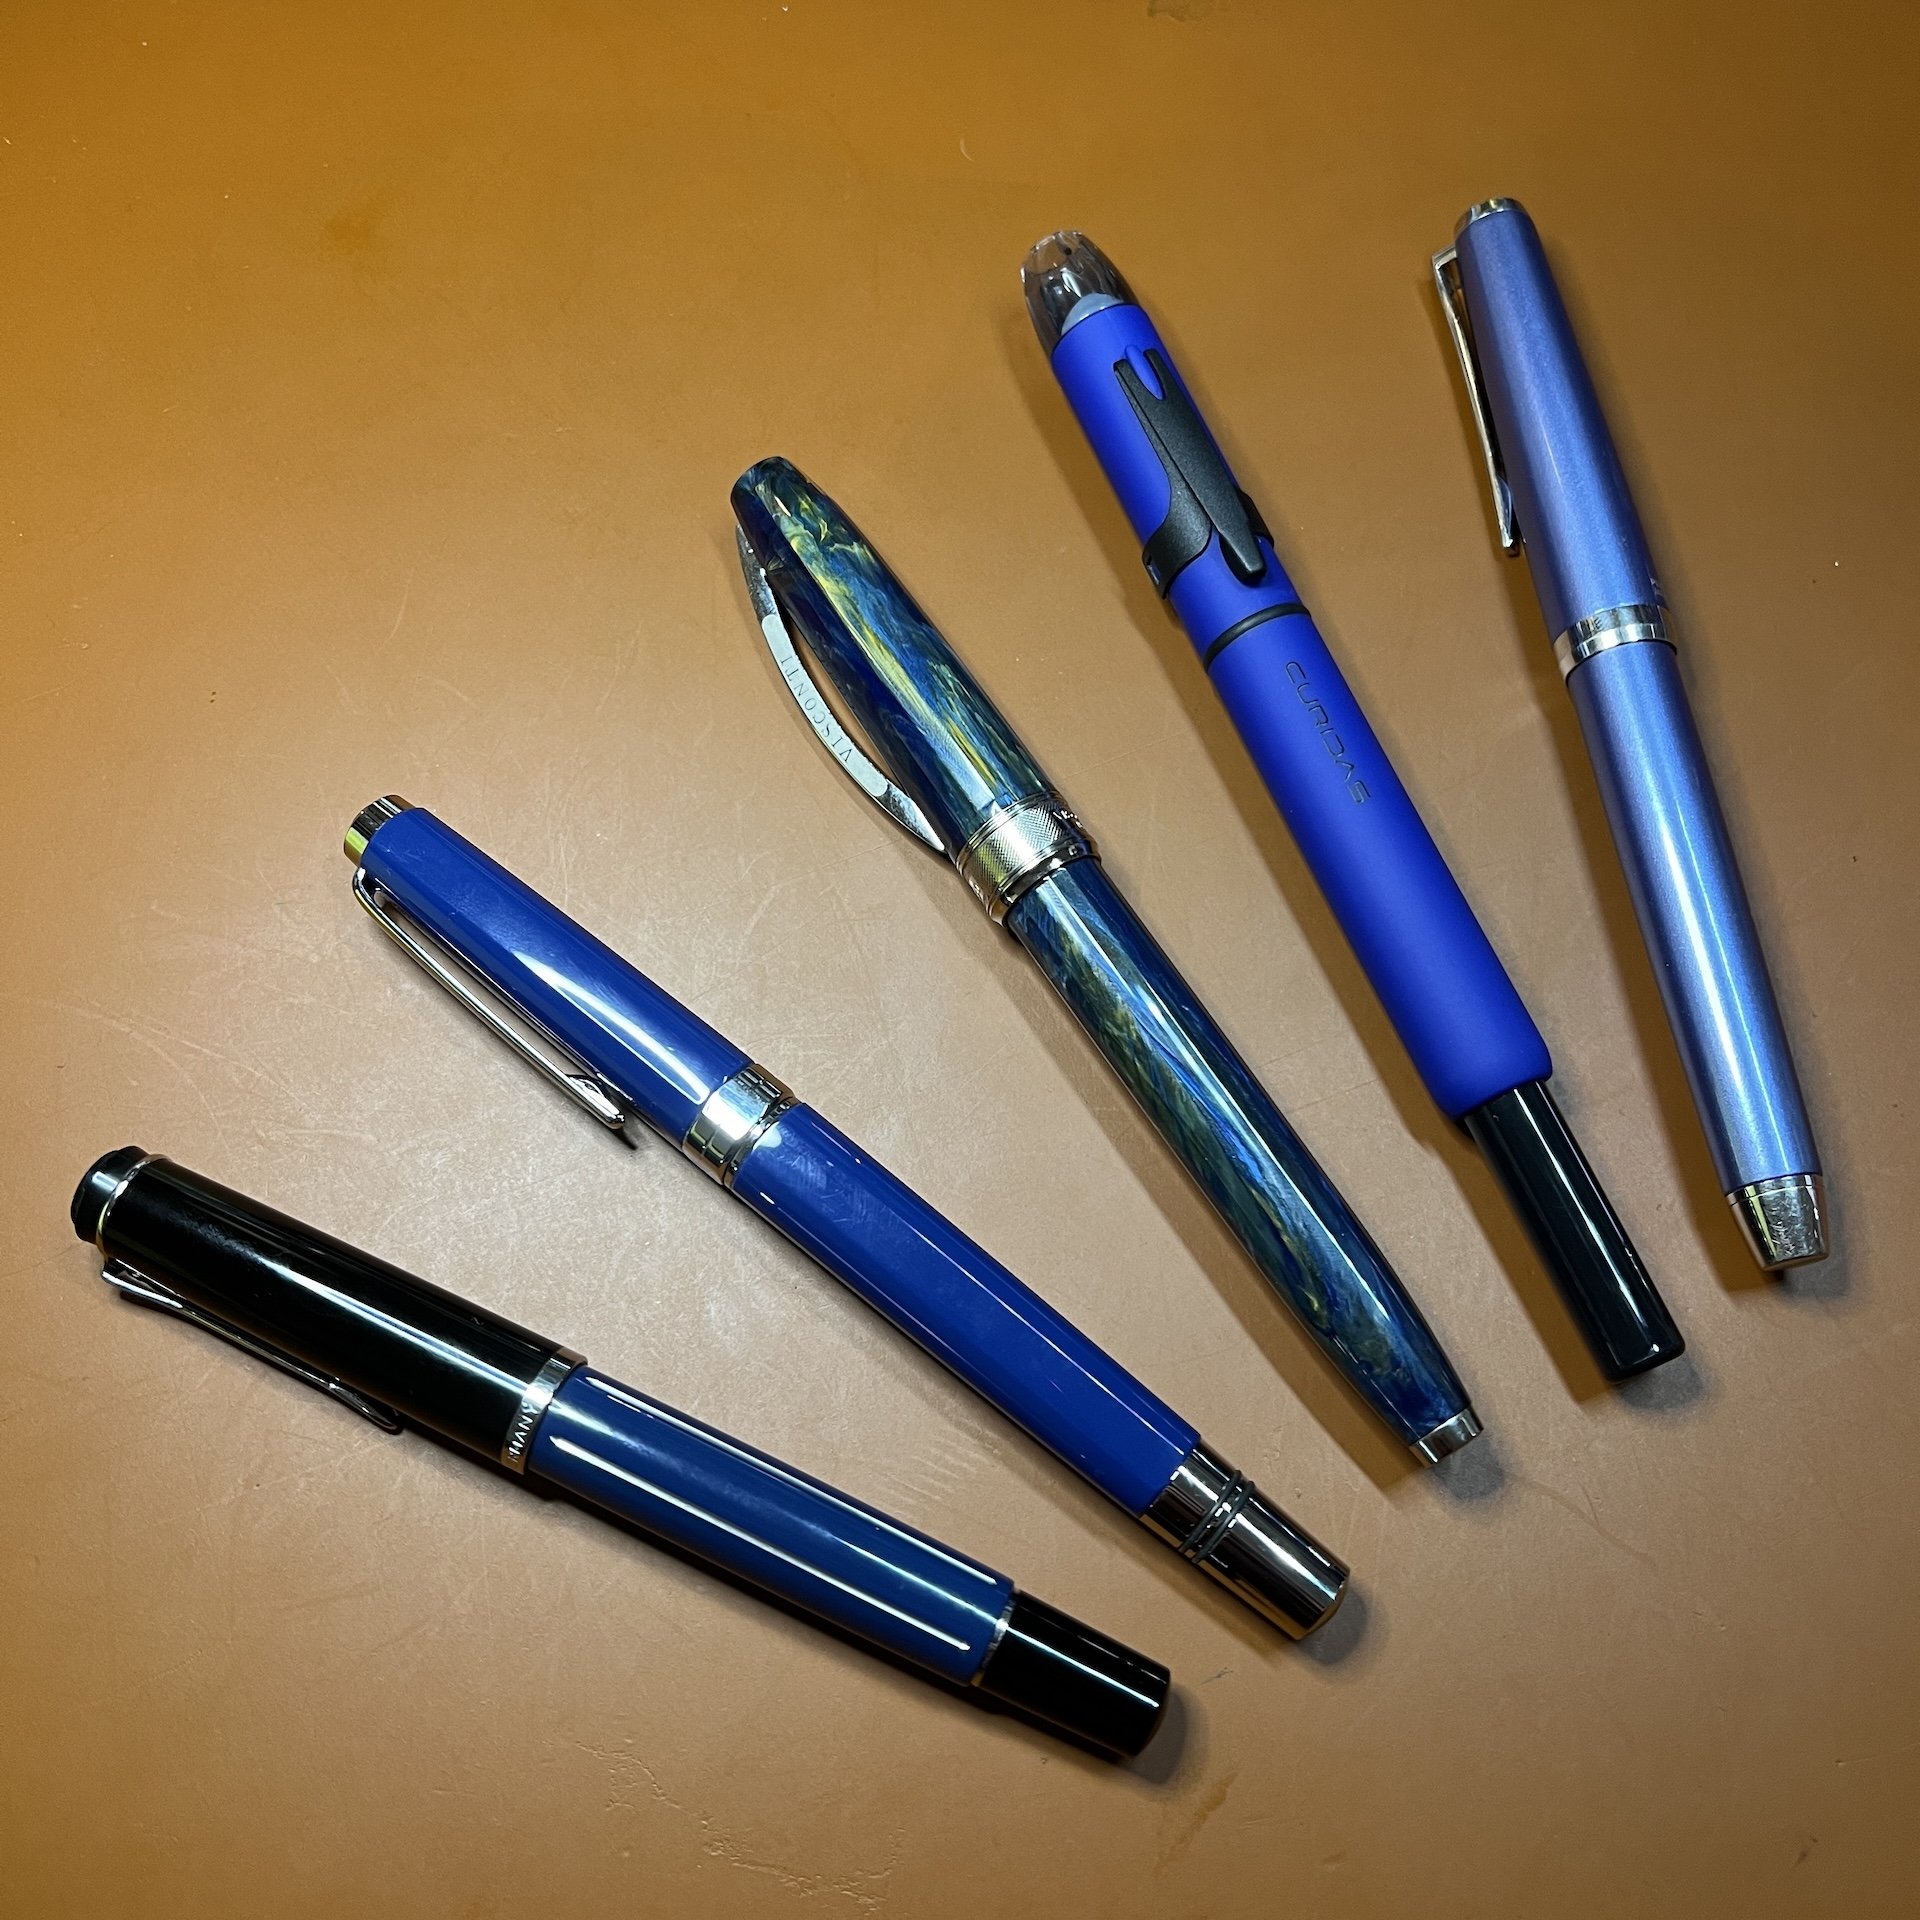 FORAY Marker-Style Porous Point Pens With Soft Grips, Medium Point